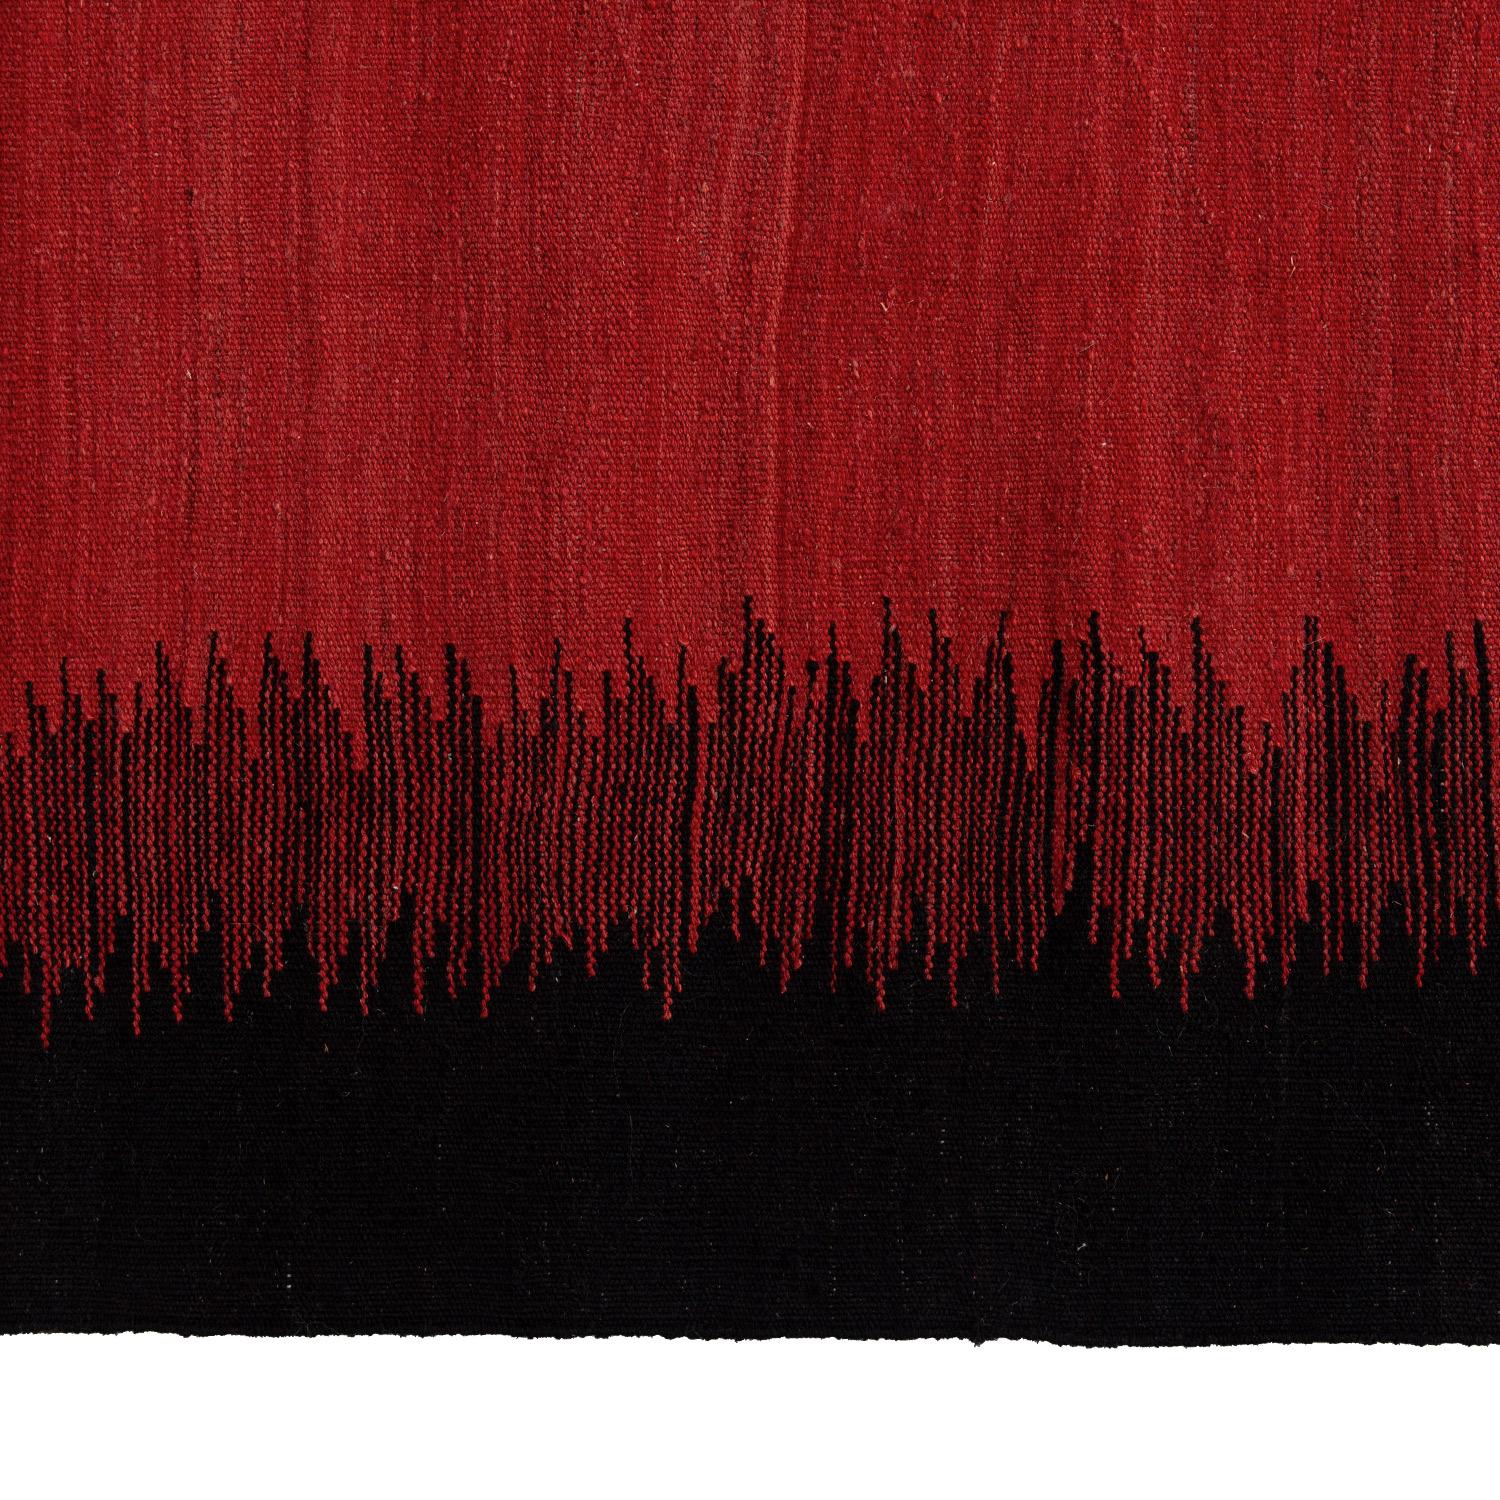 Handwoven from wool in the Mazandaran province of Turkey, this Antique Flatweave Rug - 6'x8' features an abstract pattern in a color palette of deep brown and vibrant vermillion. This area rug is created on a loom and threaded through the warps,